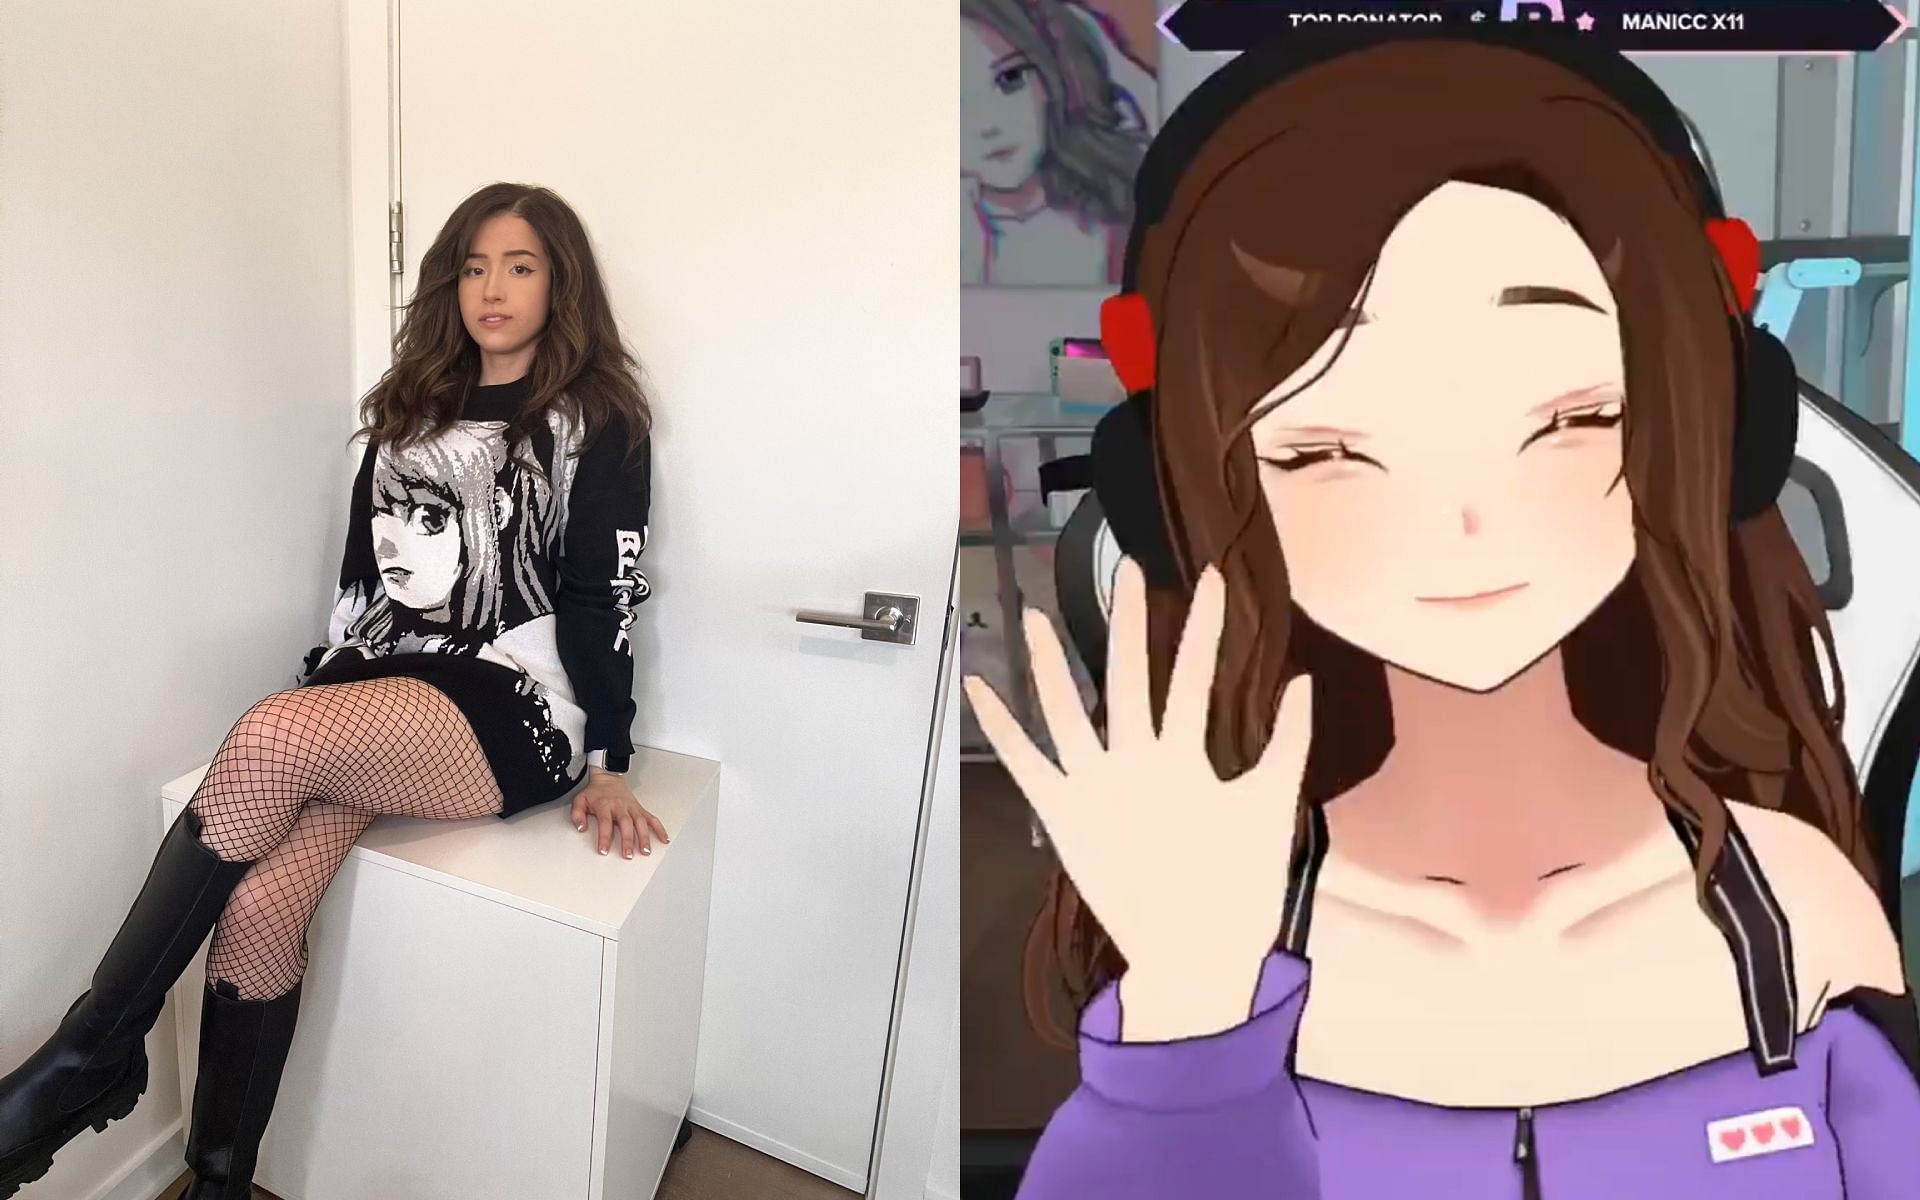 Pokimane is now a Vtuber and the internet is not happy